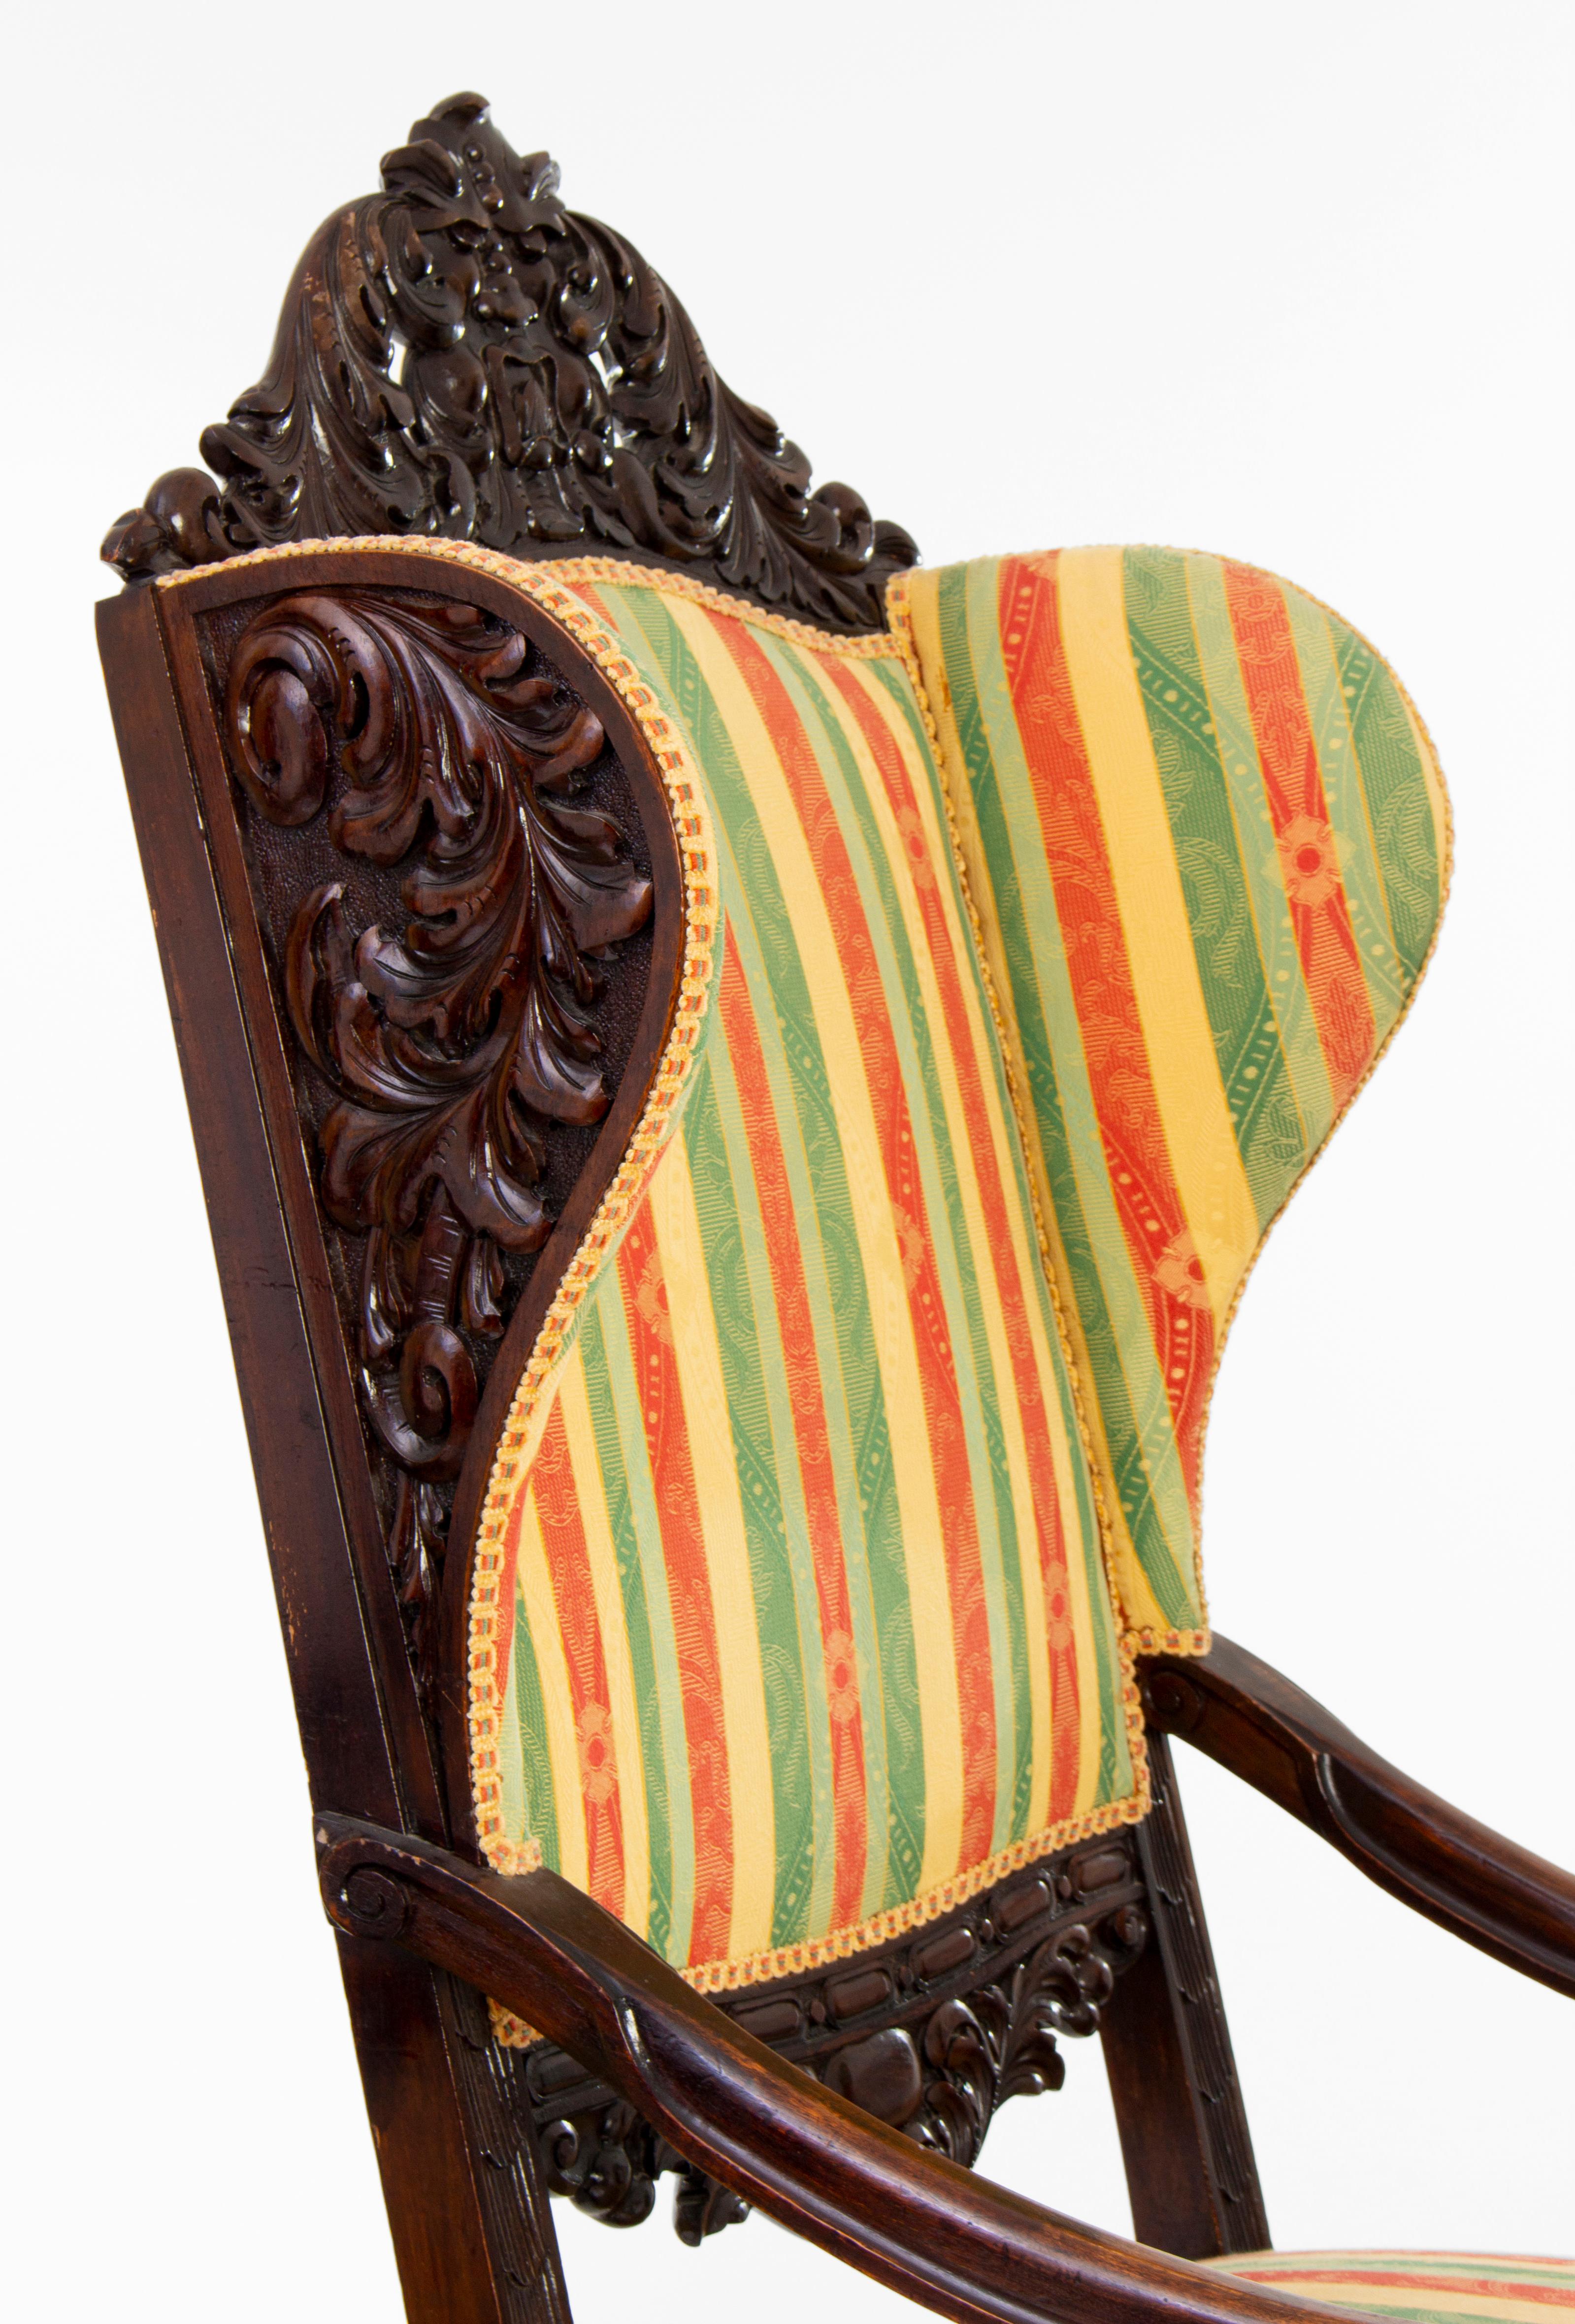 Antique carved basswood wingback chairs in historicist, eclectic style.
The thronechairs are in good condition, with beautiful coloured upholstery.
The set consists of 2 pieces.